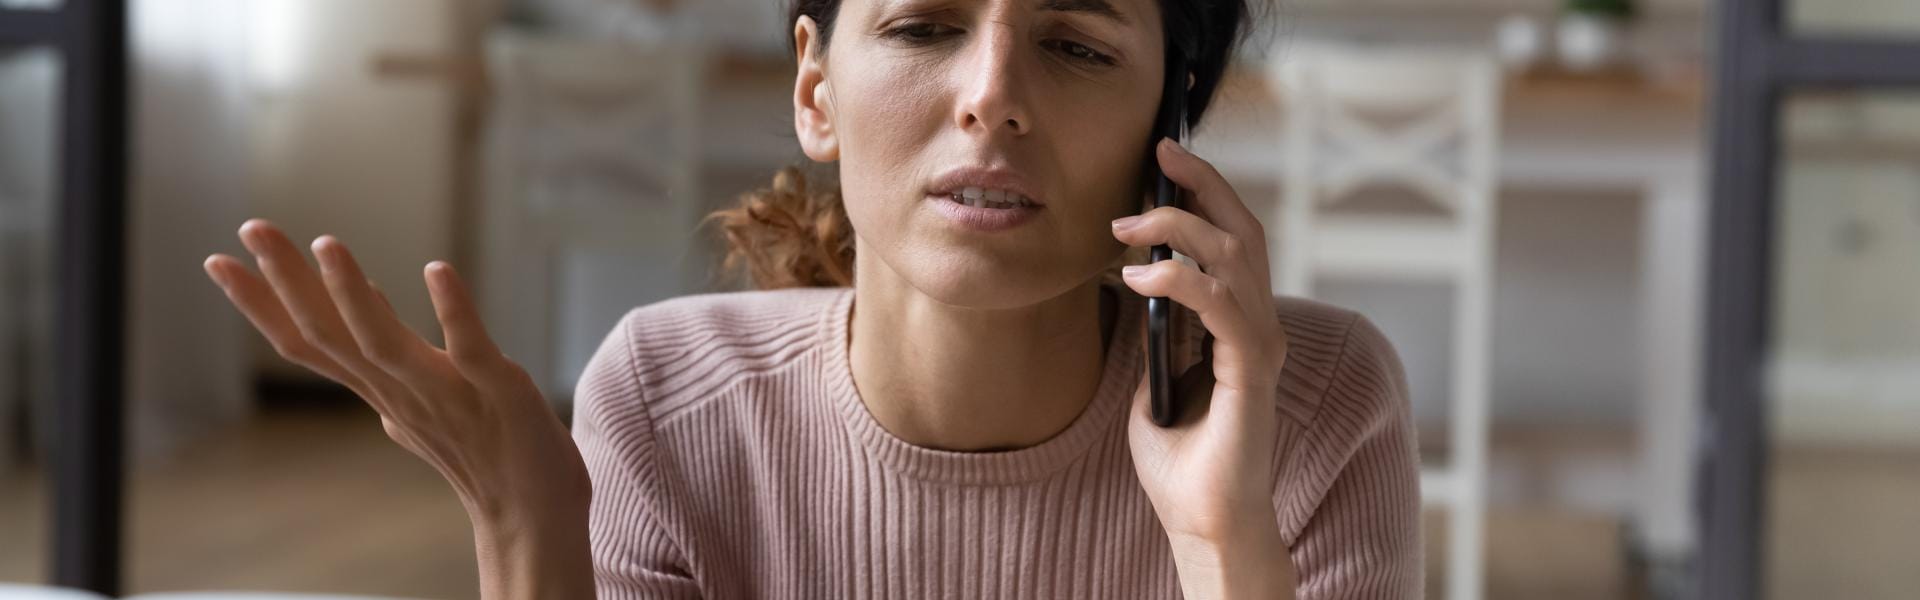 Women with concerned expression on cell phone